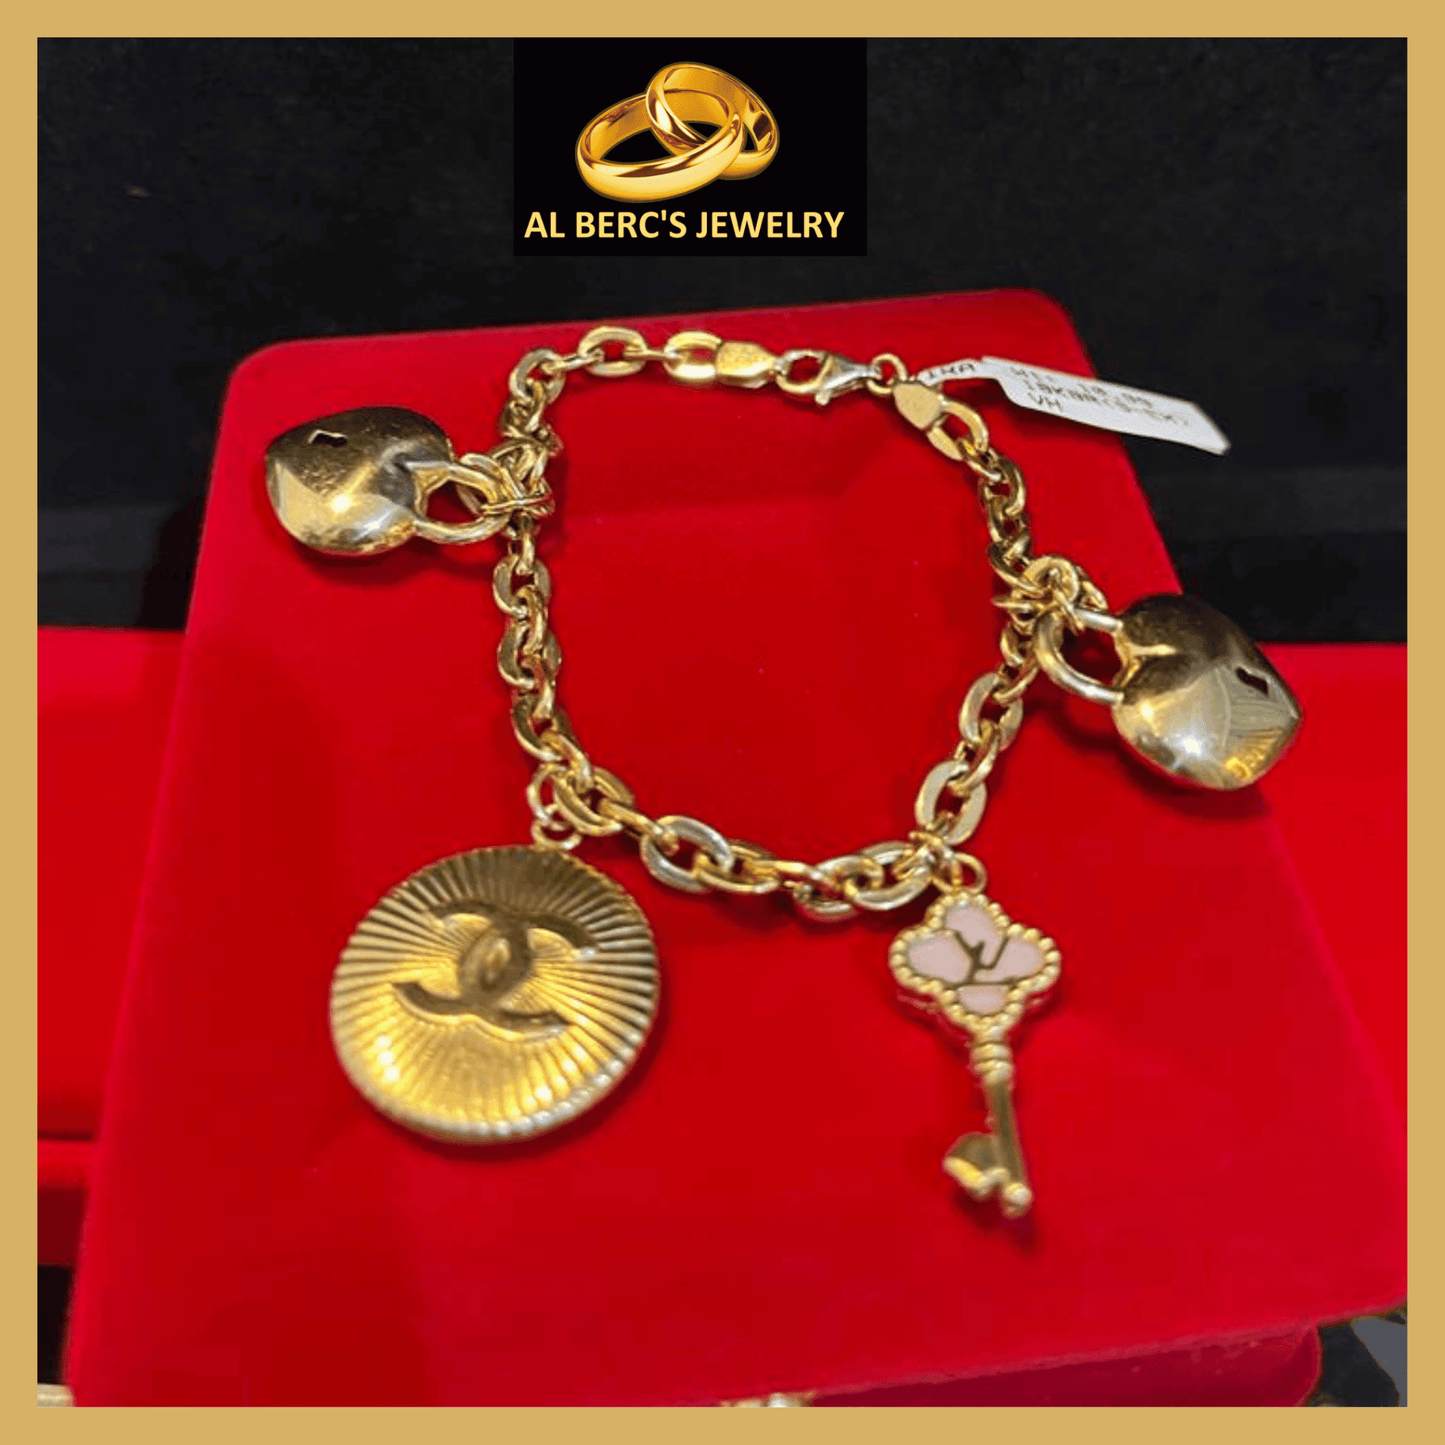 showing an 18K Gold Bracelet for Women with 4 different big pendants